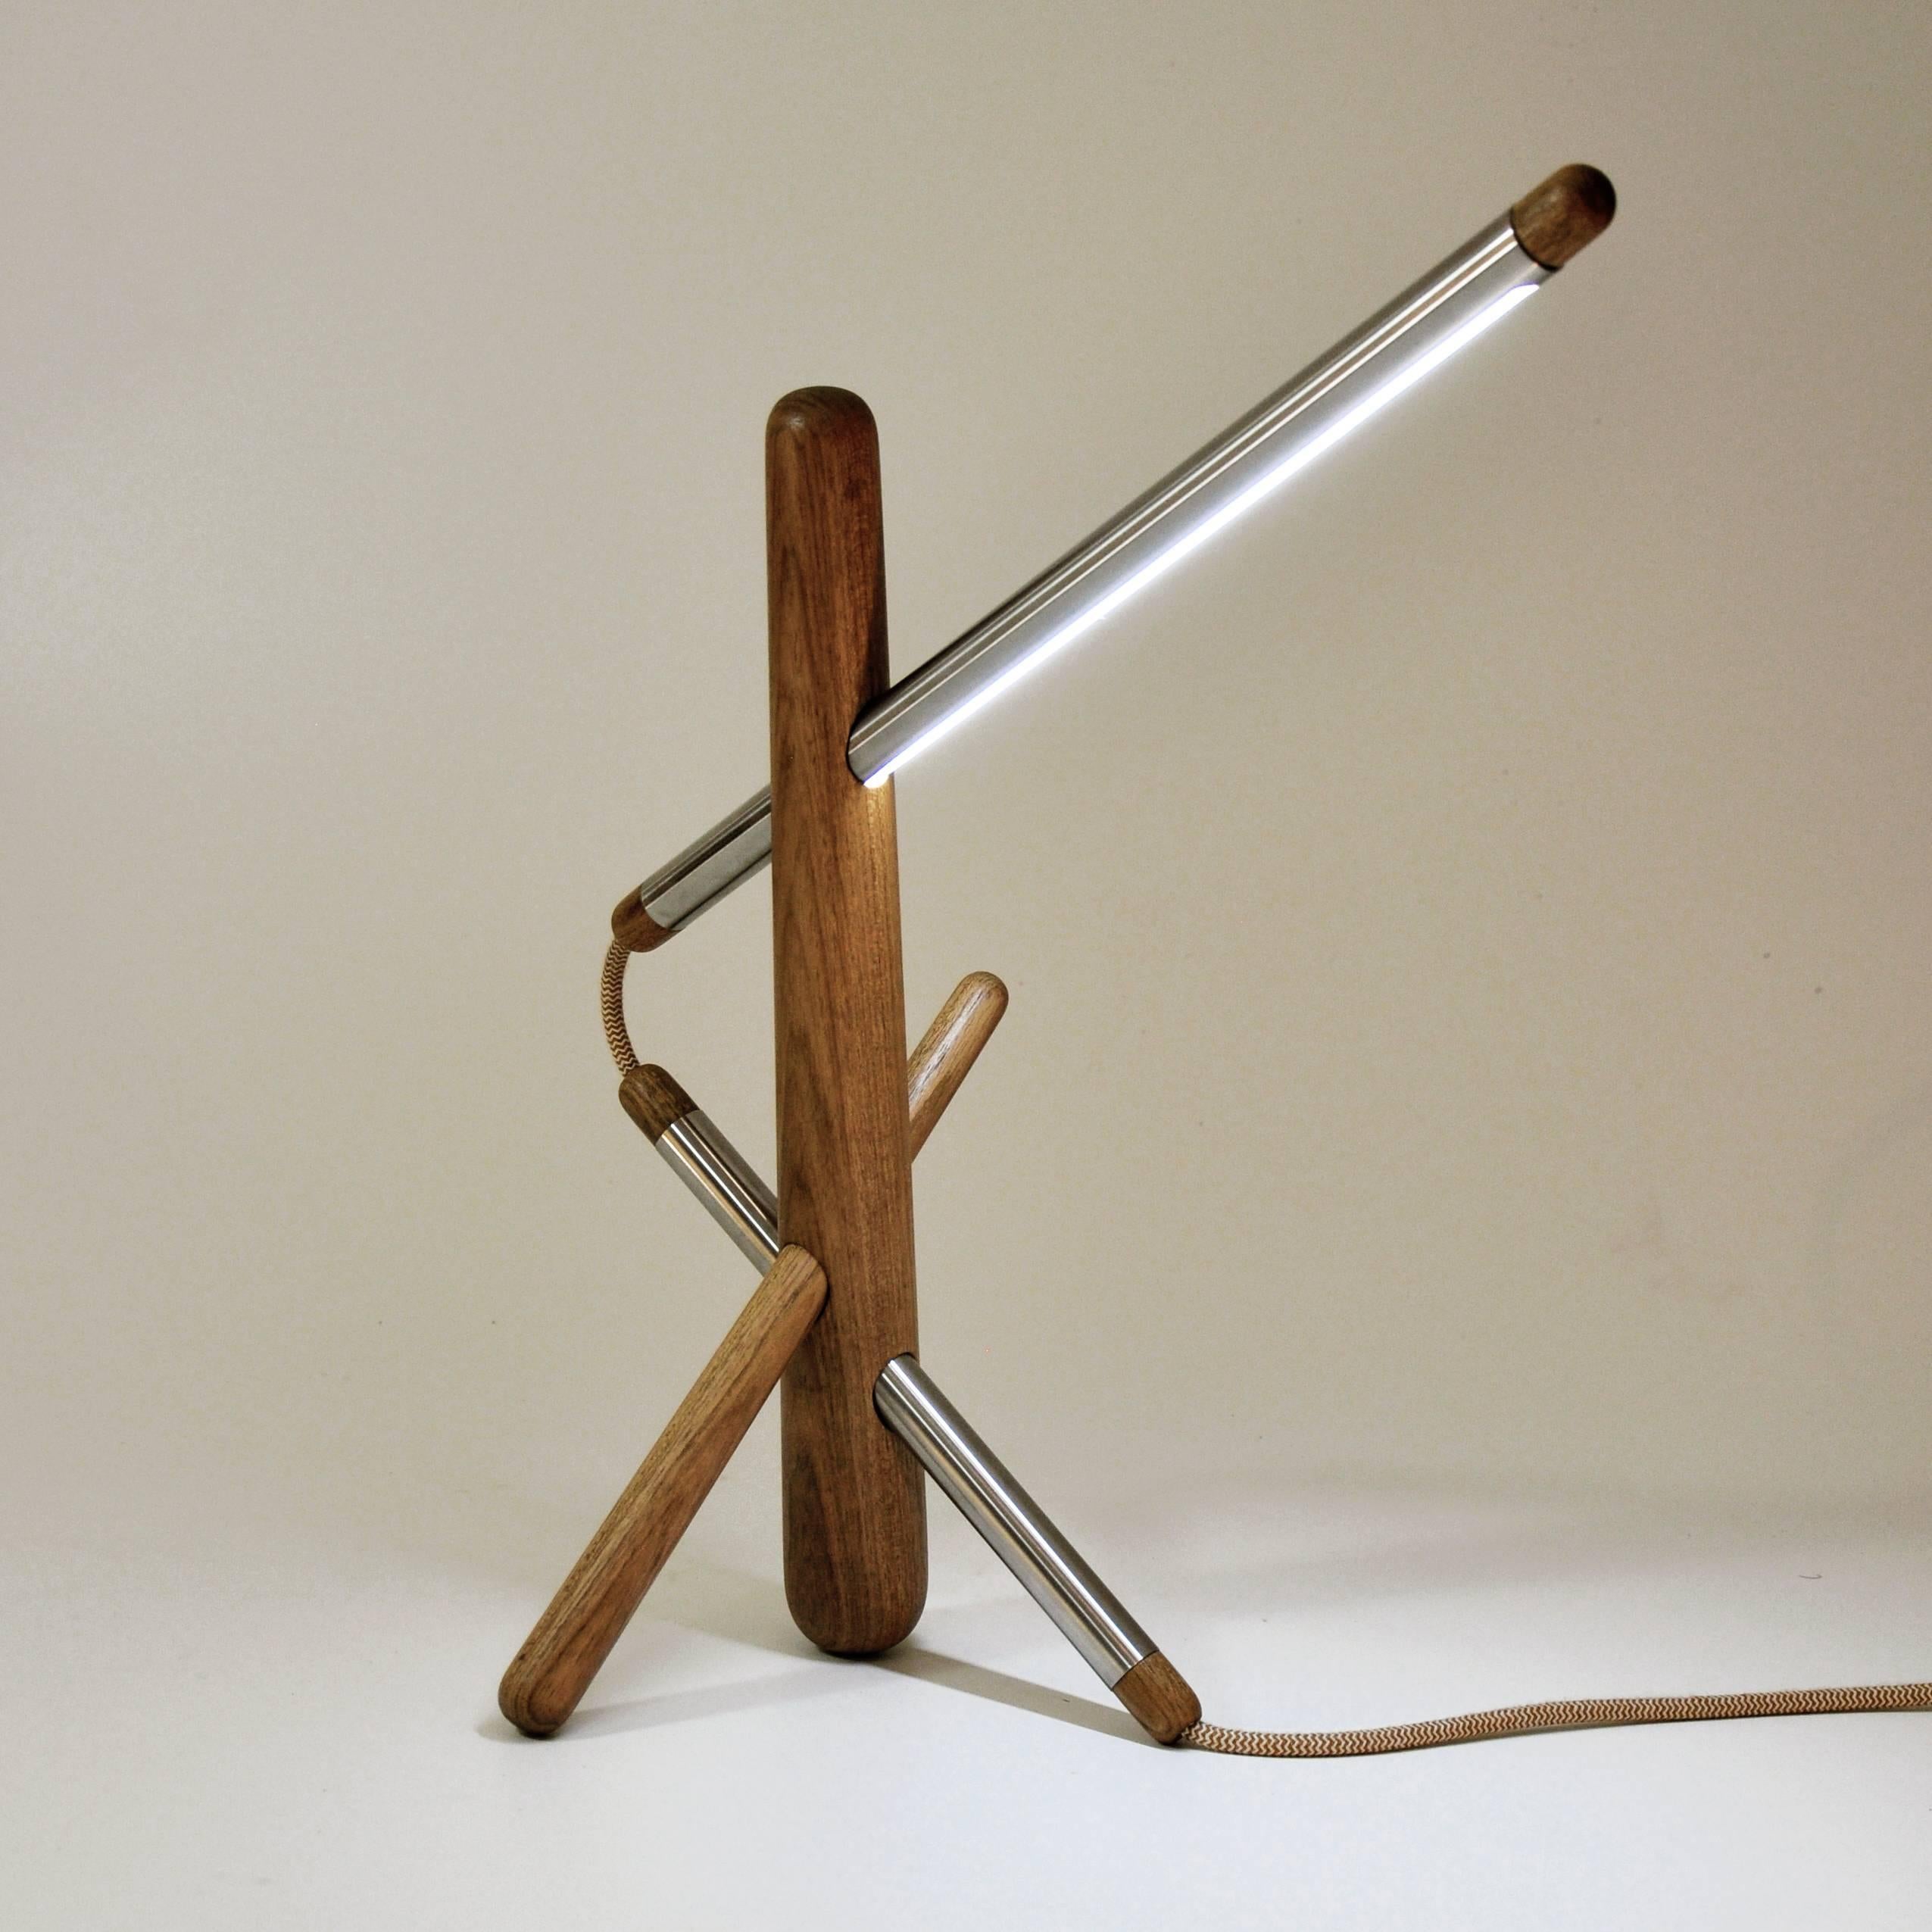 Hand-Crafted Table Lamp in Tropical Brazilian Hardwood and Stainless Steel 'Entre e Passe' For Sale